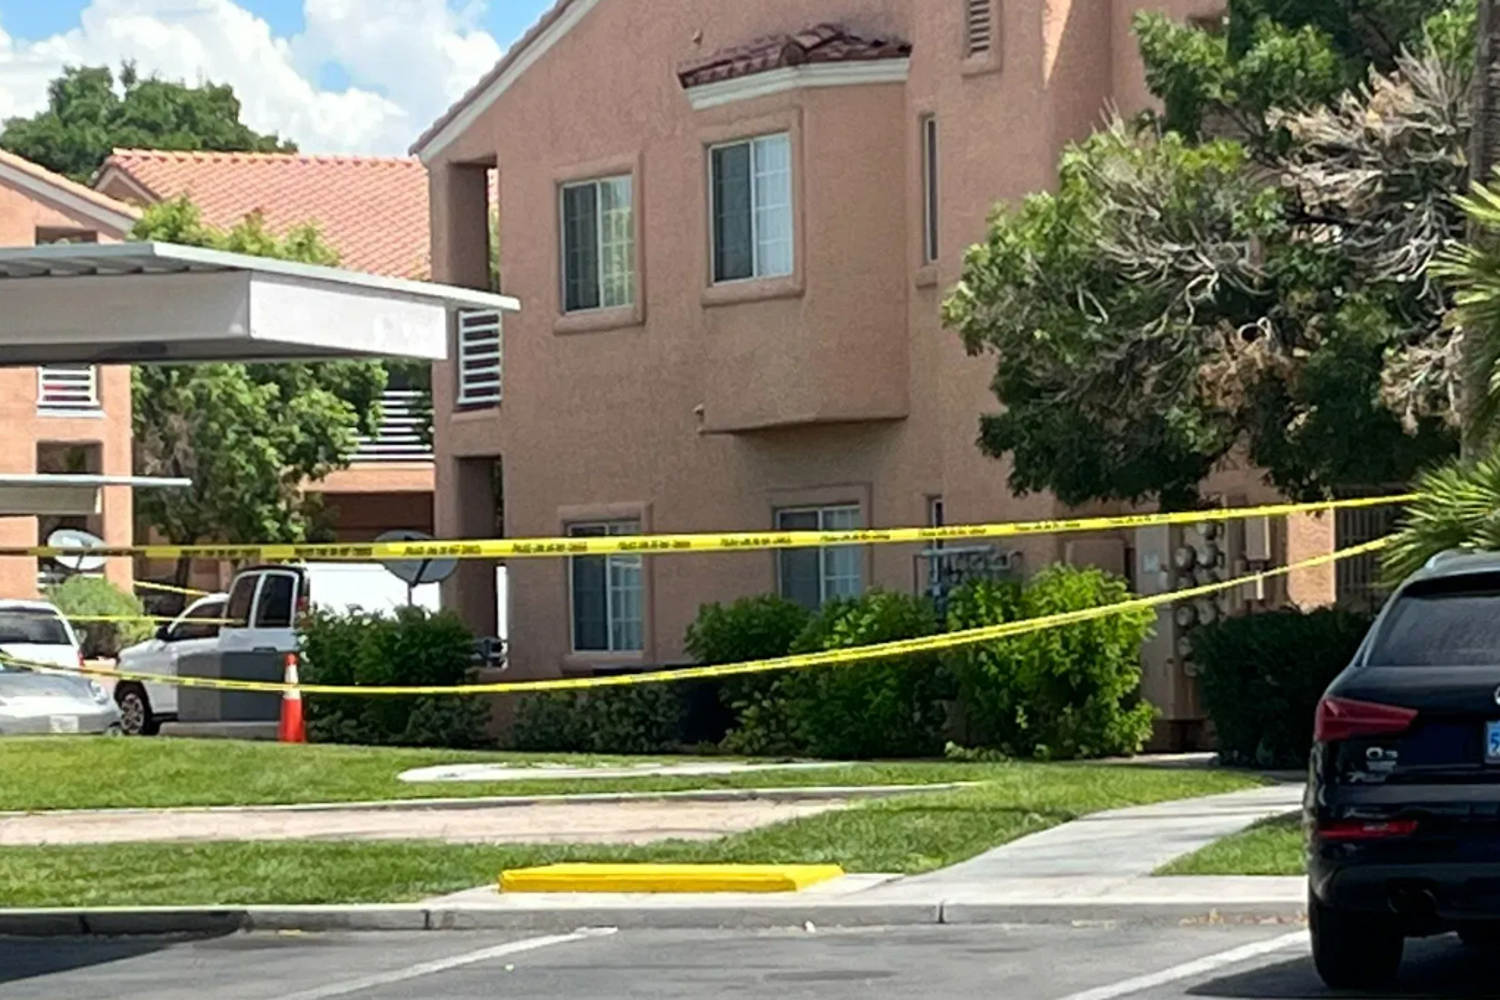 5 people killed, 1 teen critically wounded, in North Las Vegas shooting, police say